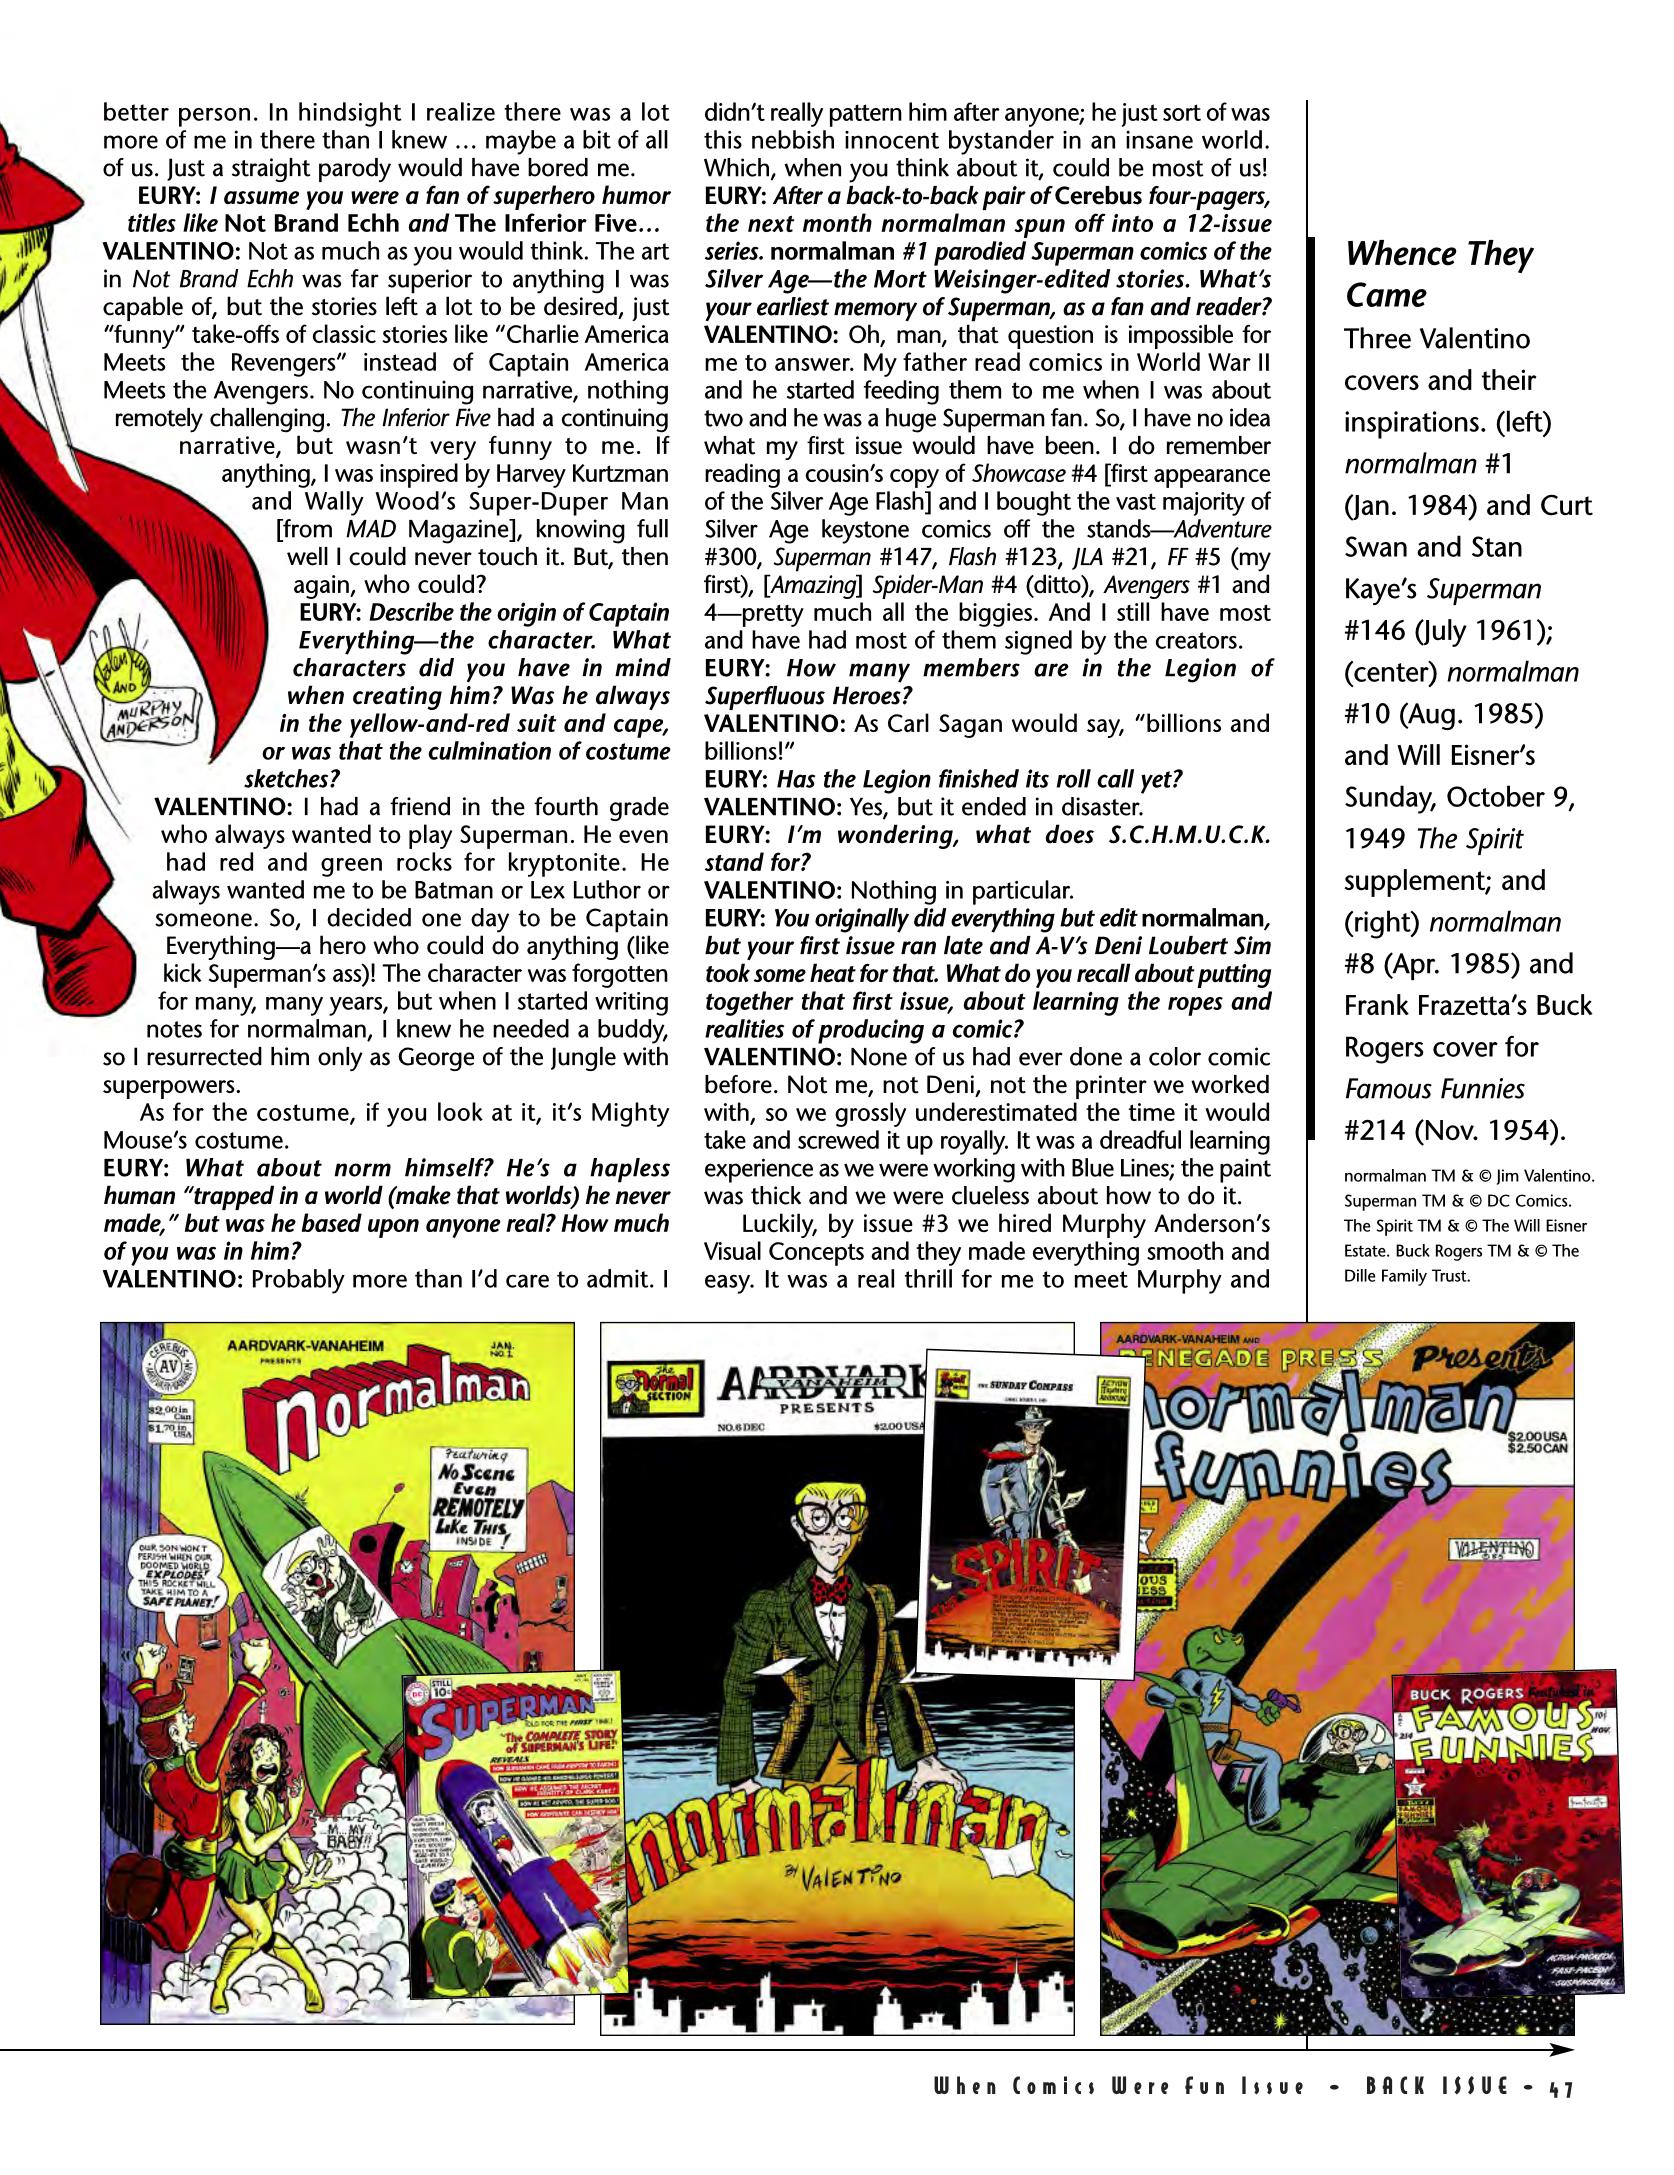 Read online Back Issue comic -  Issue #77 - 44